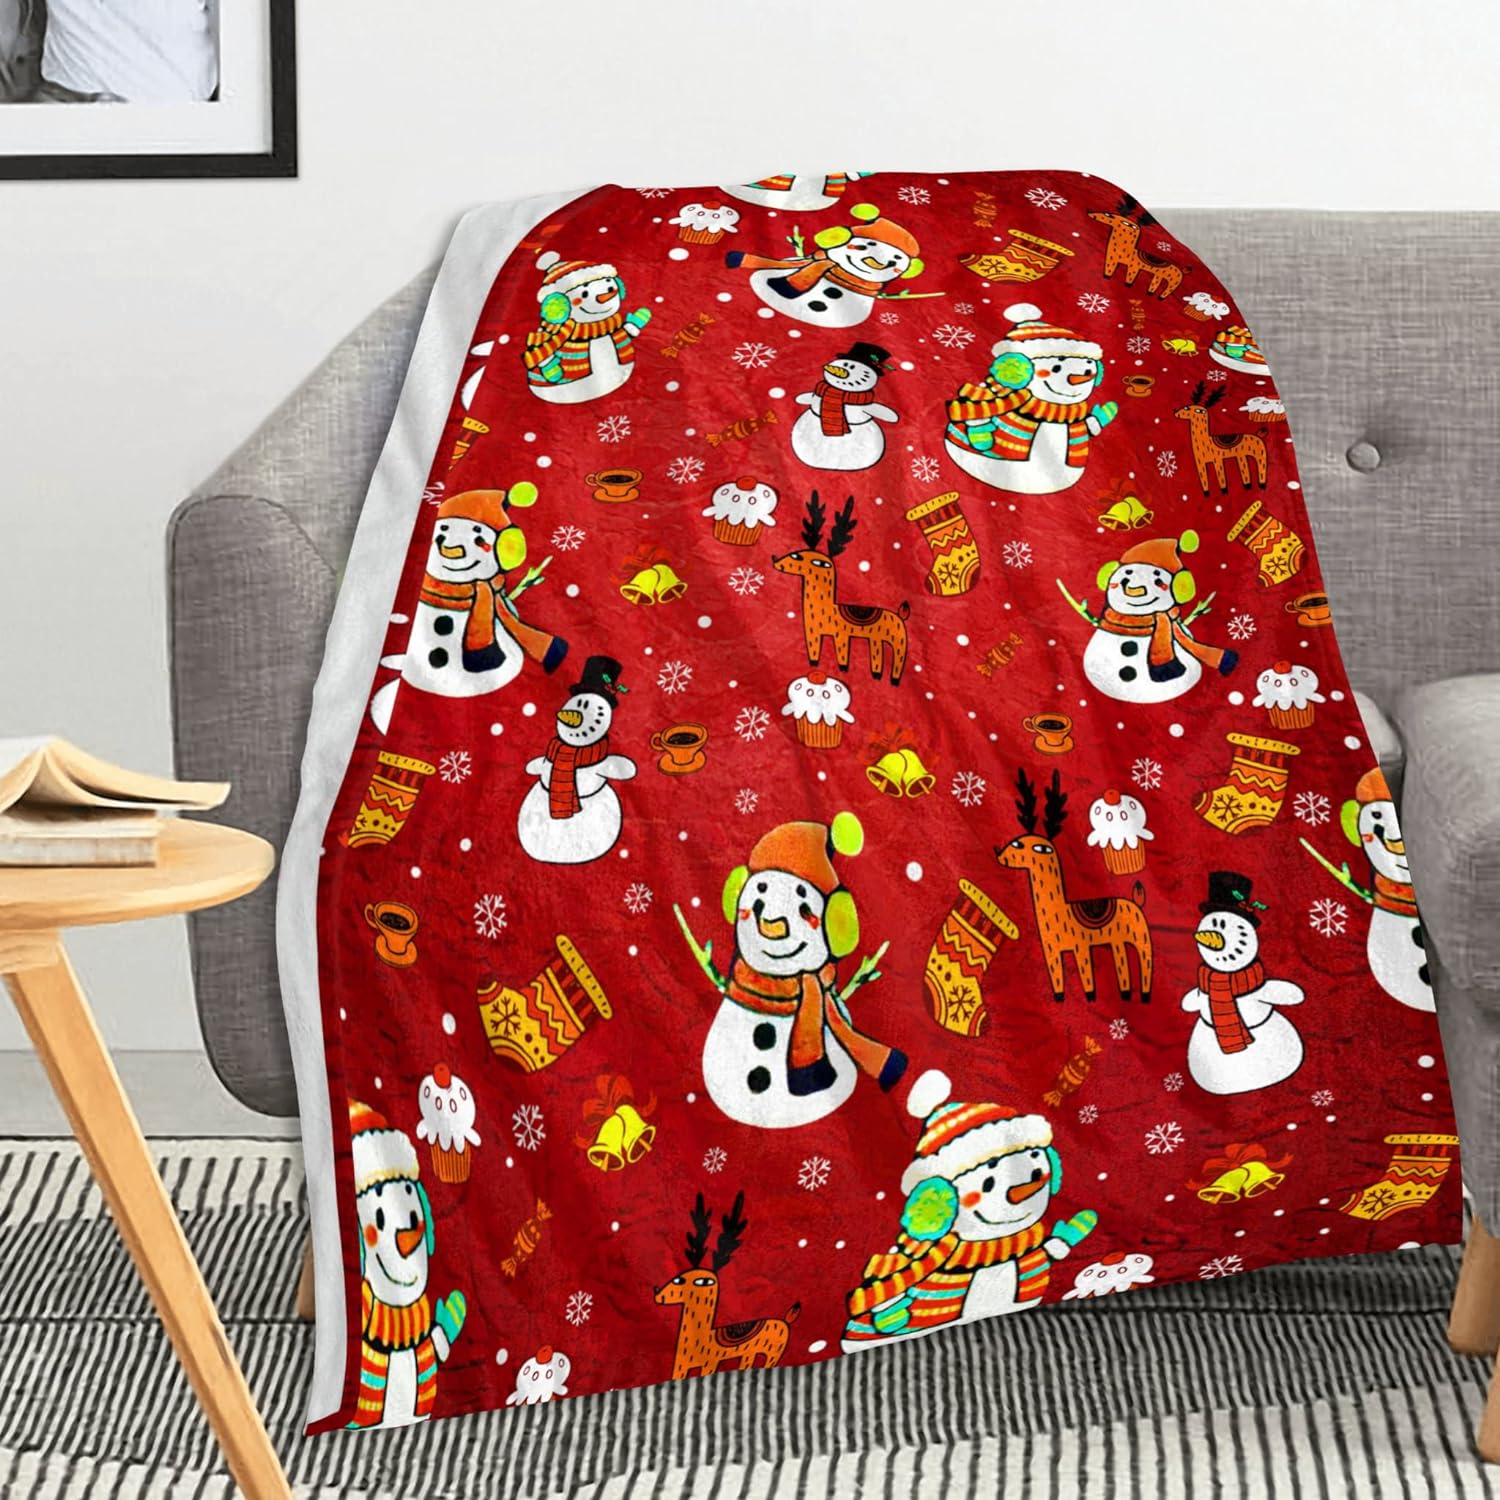 Great Choice Products Soft Plush Christmas Blanket,Christmas Snowman Deer Bell Socks Warm Throw Blanket For Couch, Seasonal Winter Xmas Holida?